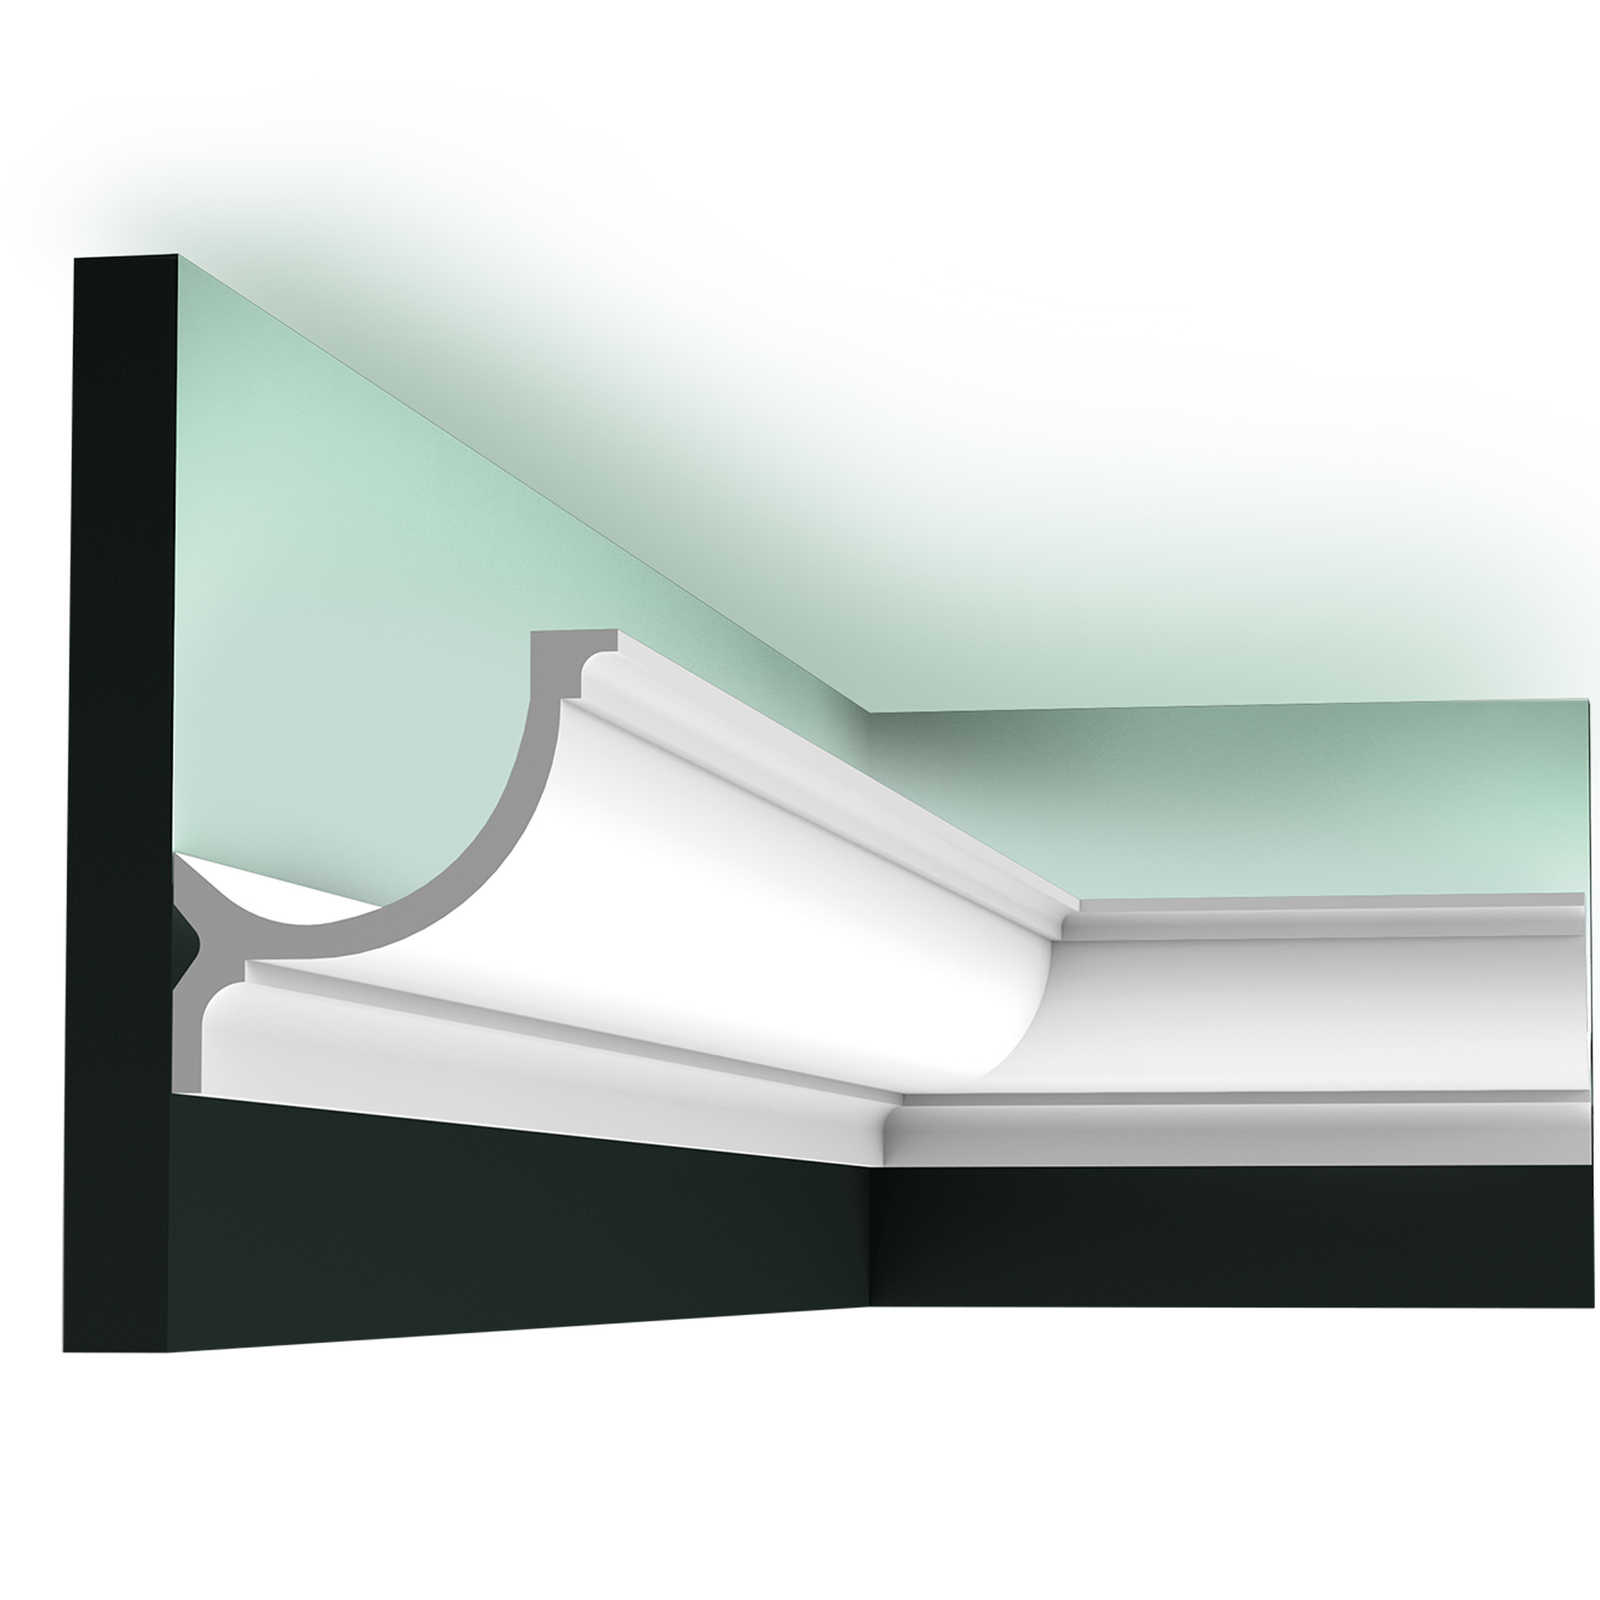             Classic moulding for indirect lighting Shanghai - C902
        